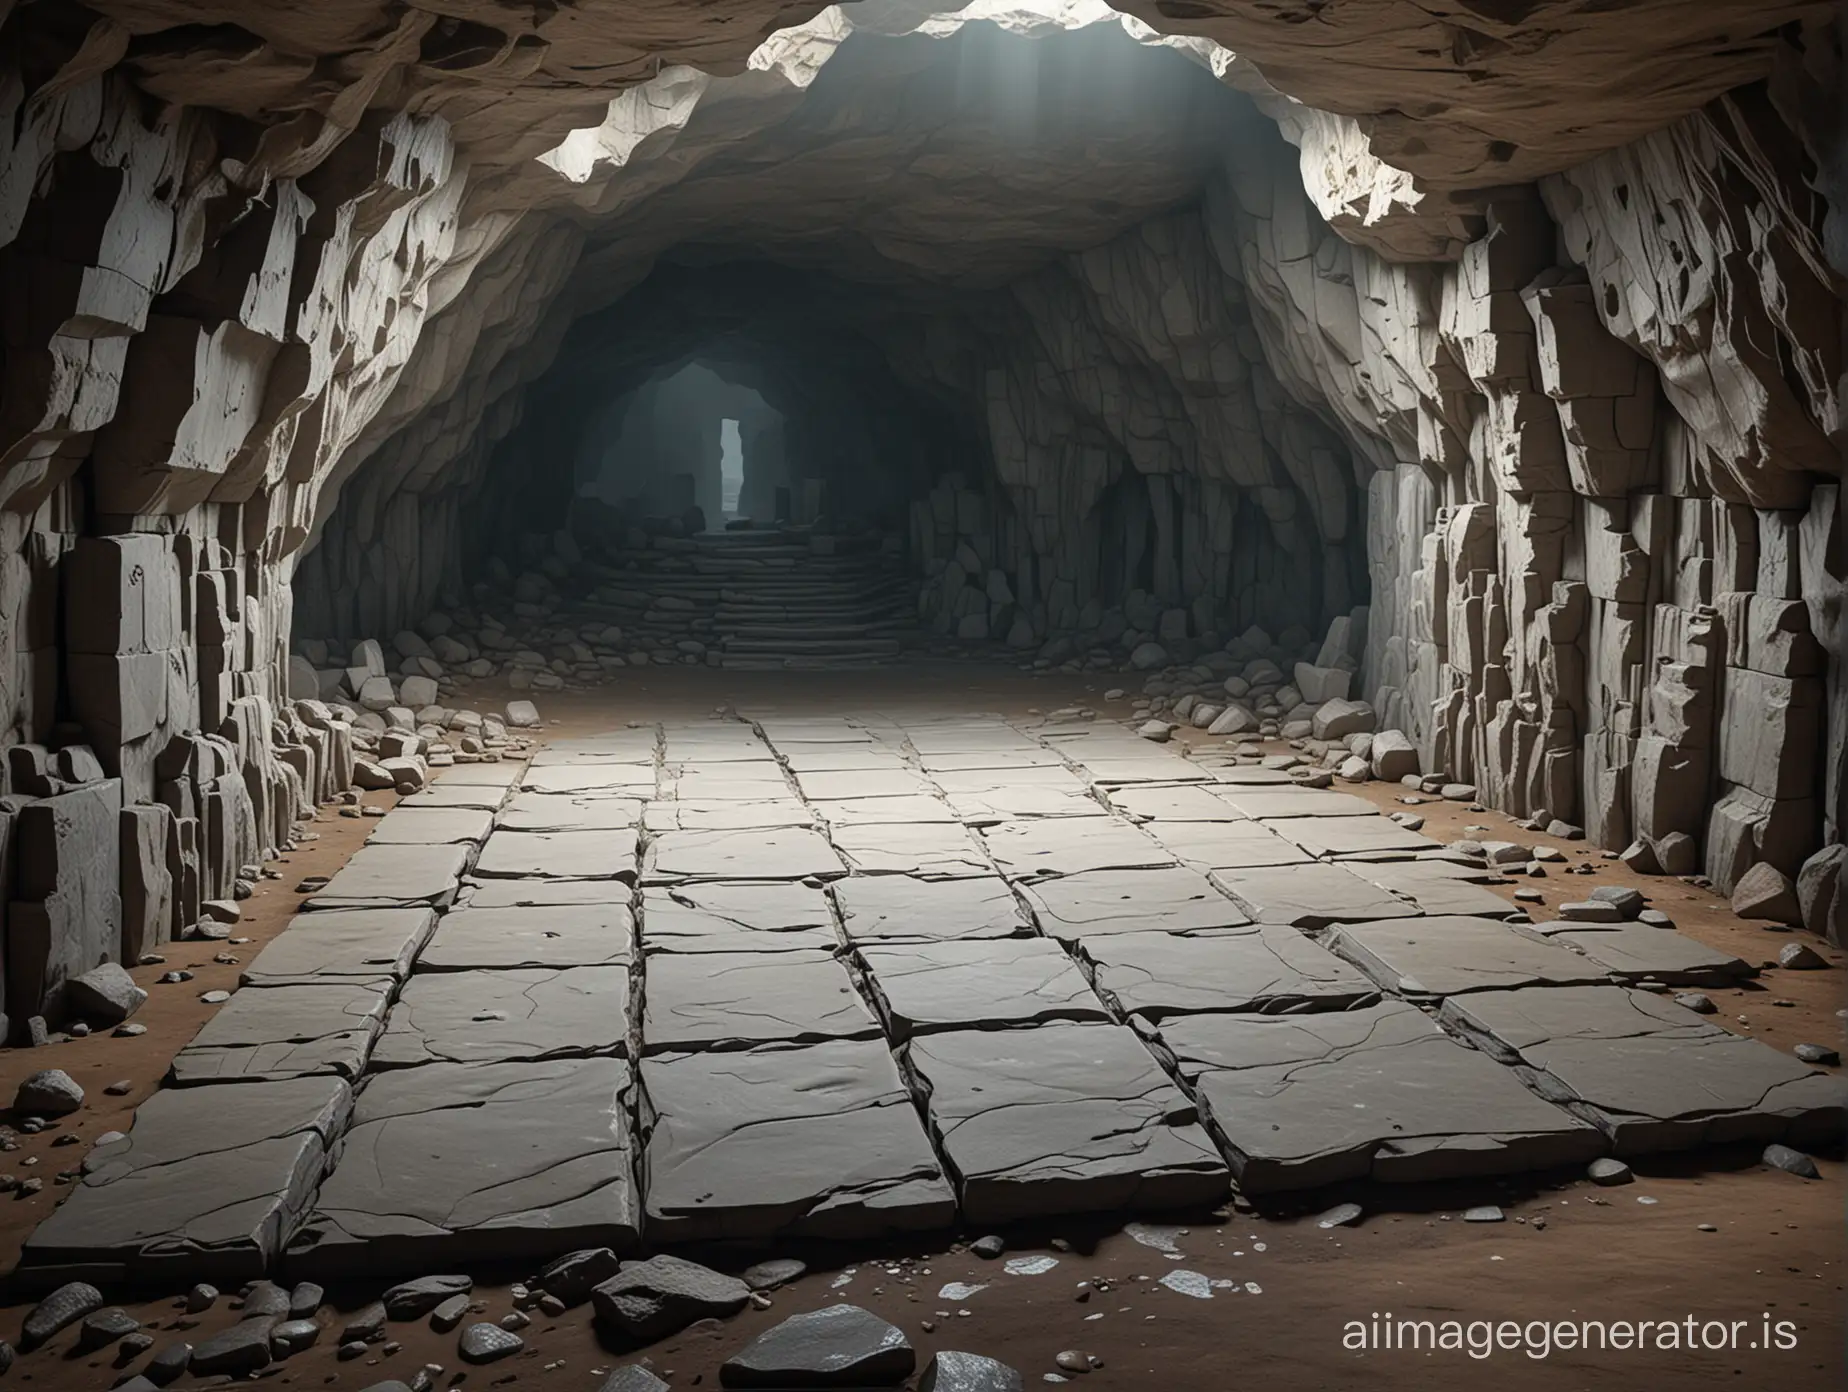 Monumental-Cave-with-Giant-Square-Stone-Slabs-Fantasy-ObsCure-Game-Concept-Art